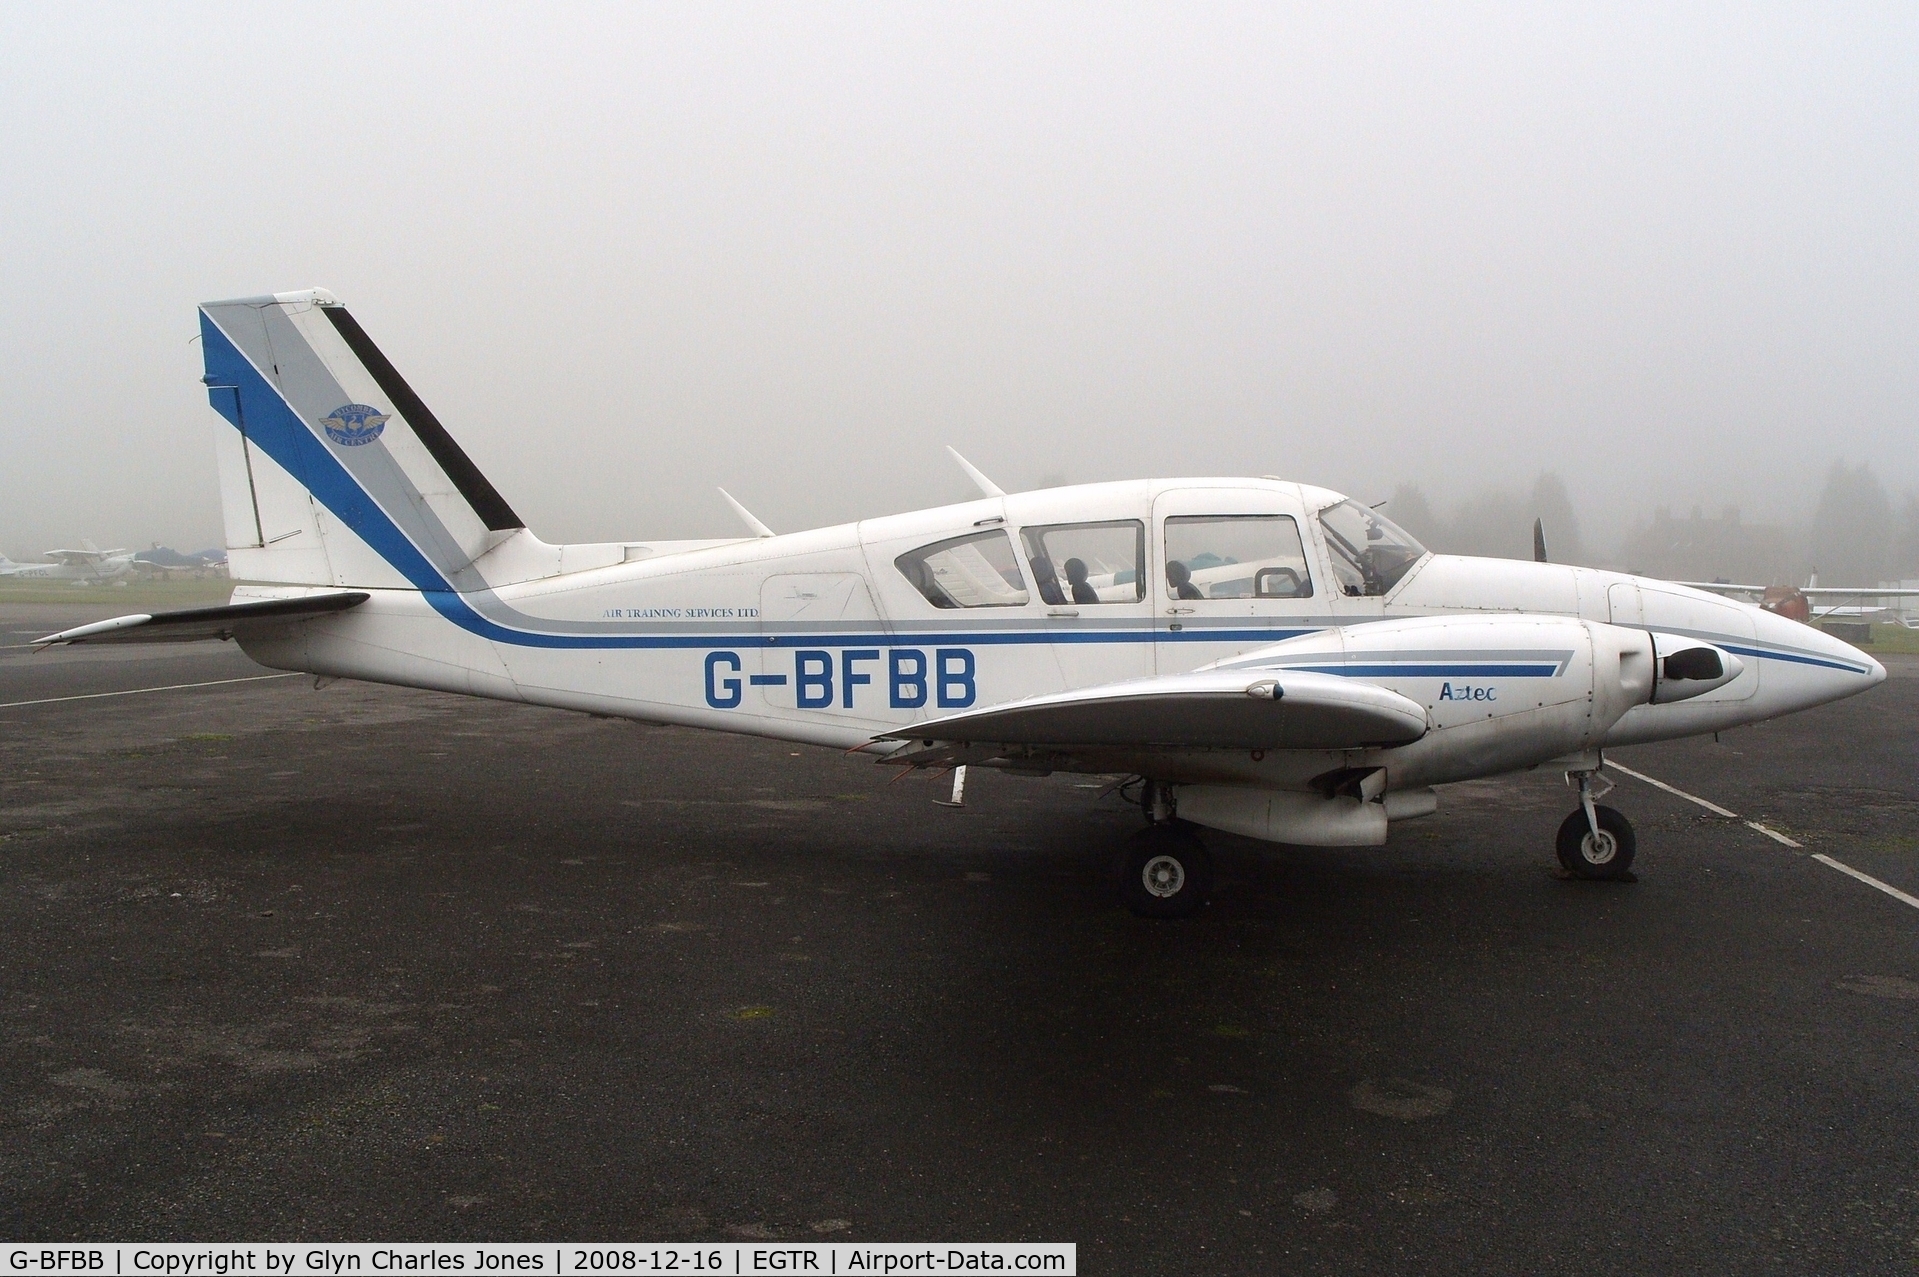 G-BFBB, 1973 Piper PA-E23-250 Aztec C/N 27-7405294, Taken on a quiet cold and foggy day. With thanks to Elstree control tower who granted me authority to take photographs on the aerodrome. Previously SE-GBI. Showing 'Wycombe Air Centre - Air Training Services Ltd.